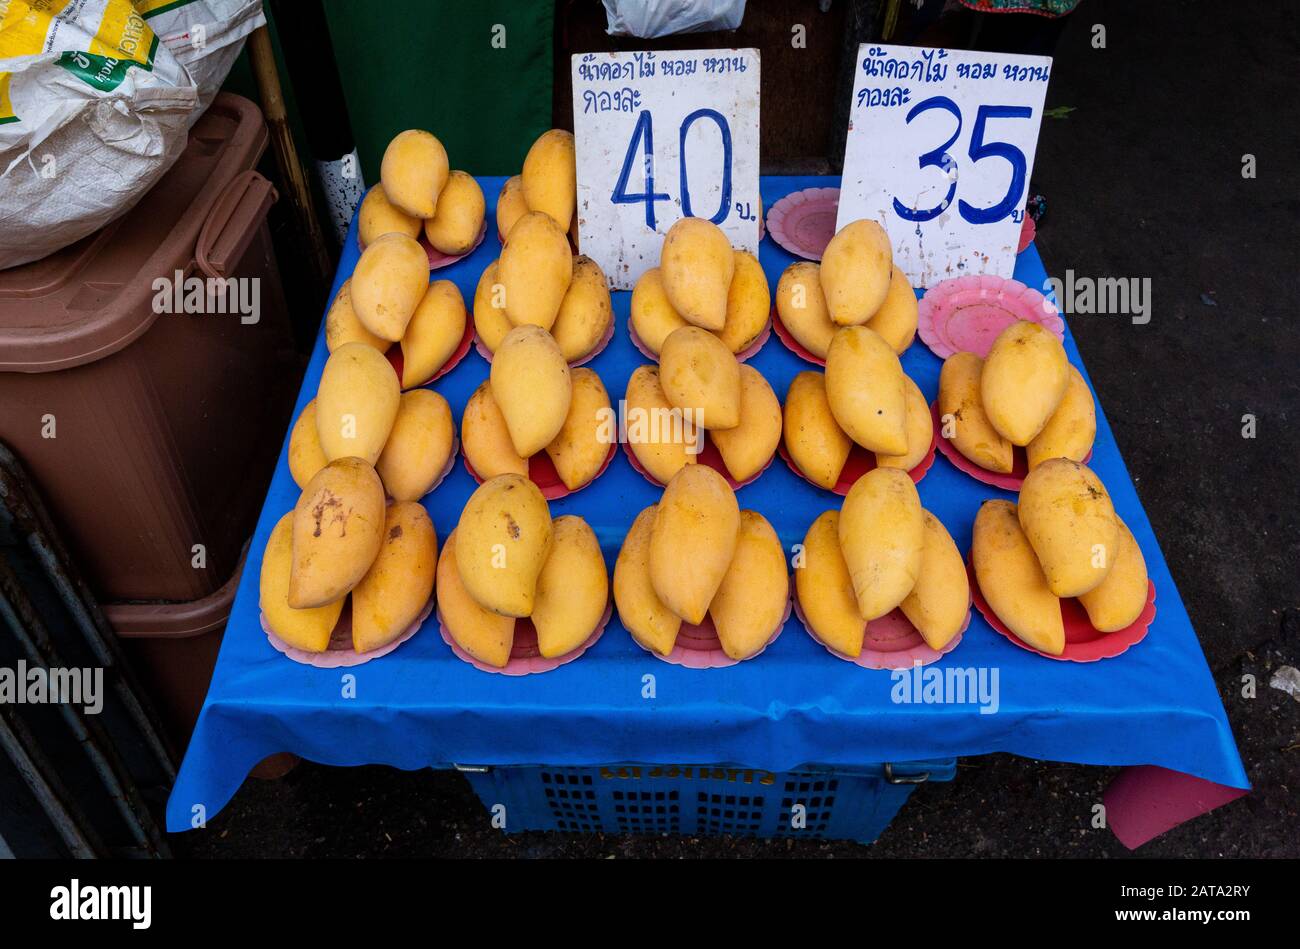 Yellow mangoes for sale at an open-air street market in Chiang Mai, Thailand, with prices in Baht (Thailand currency). Stock Photo